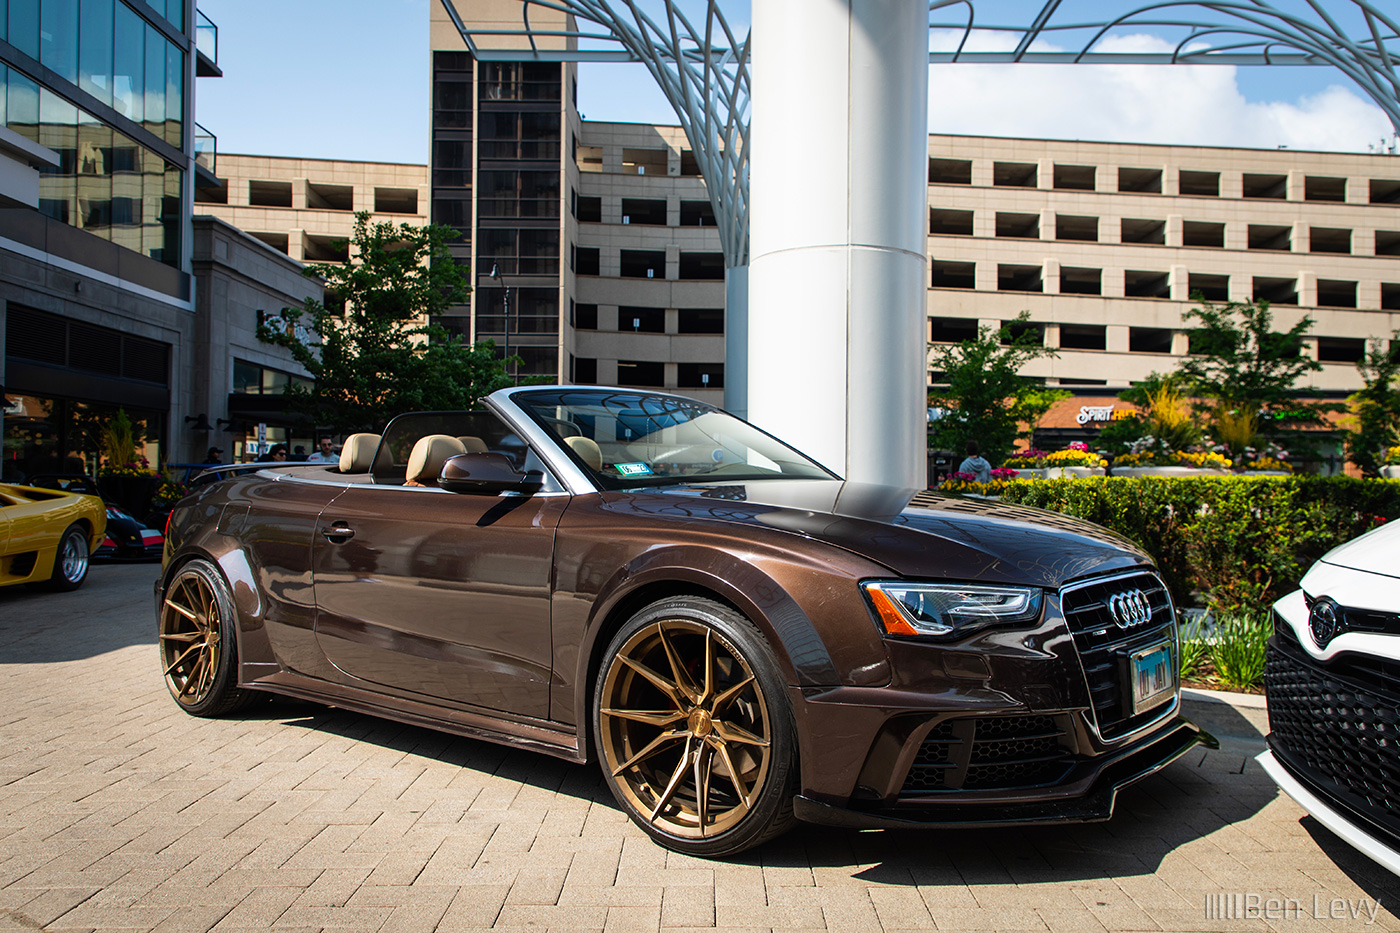 Brown Audi S4 Cabriolet at Car Meet in Lincoln Park